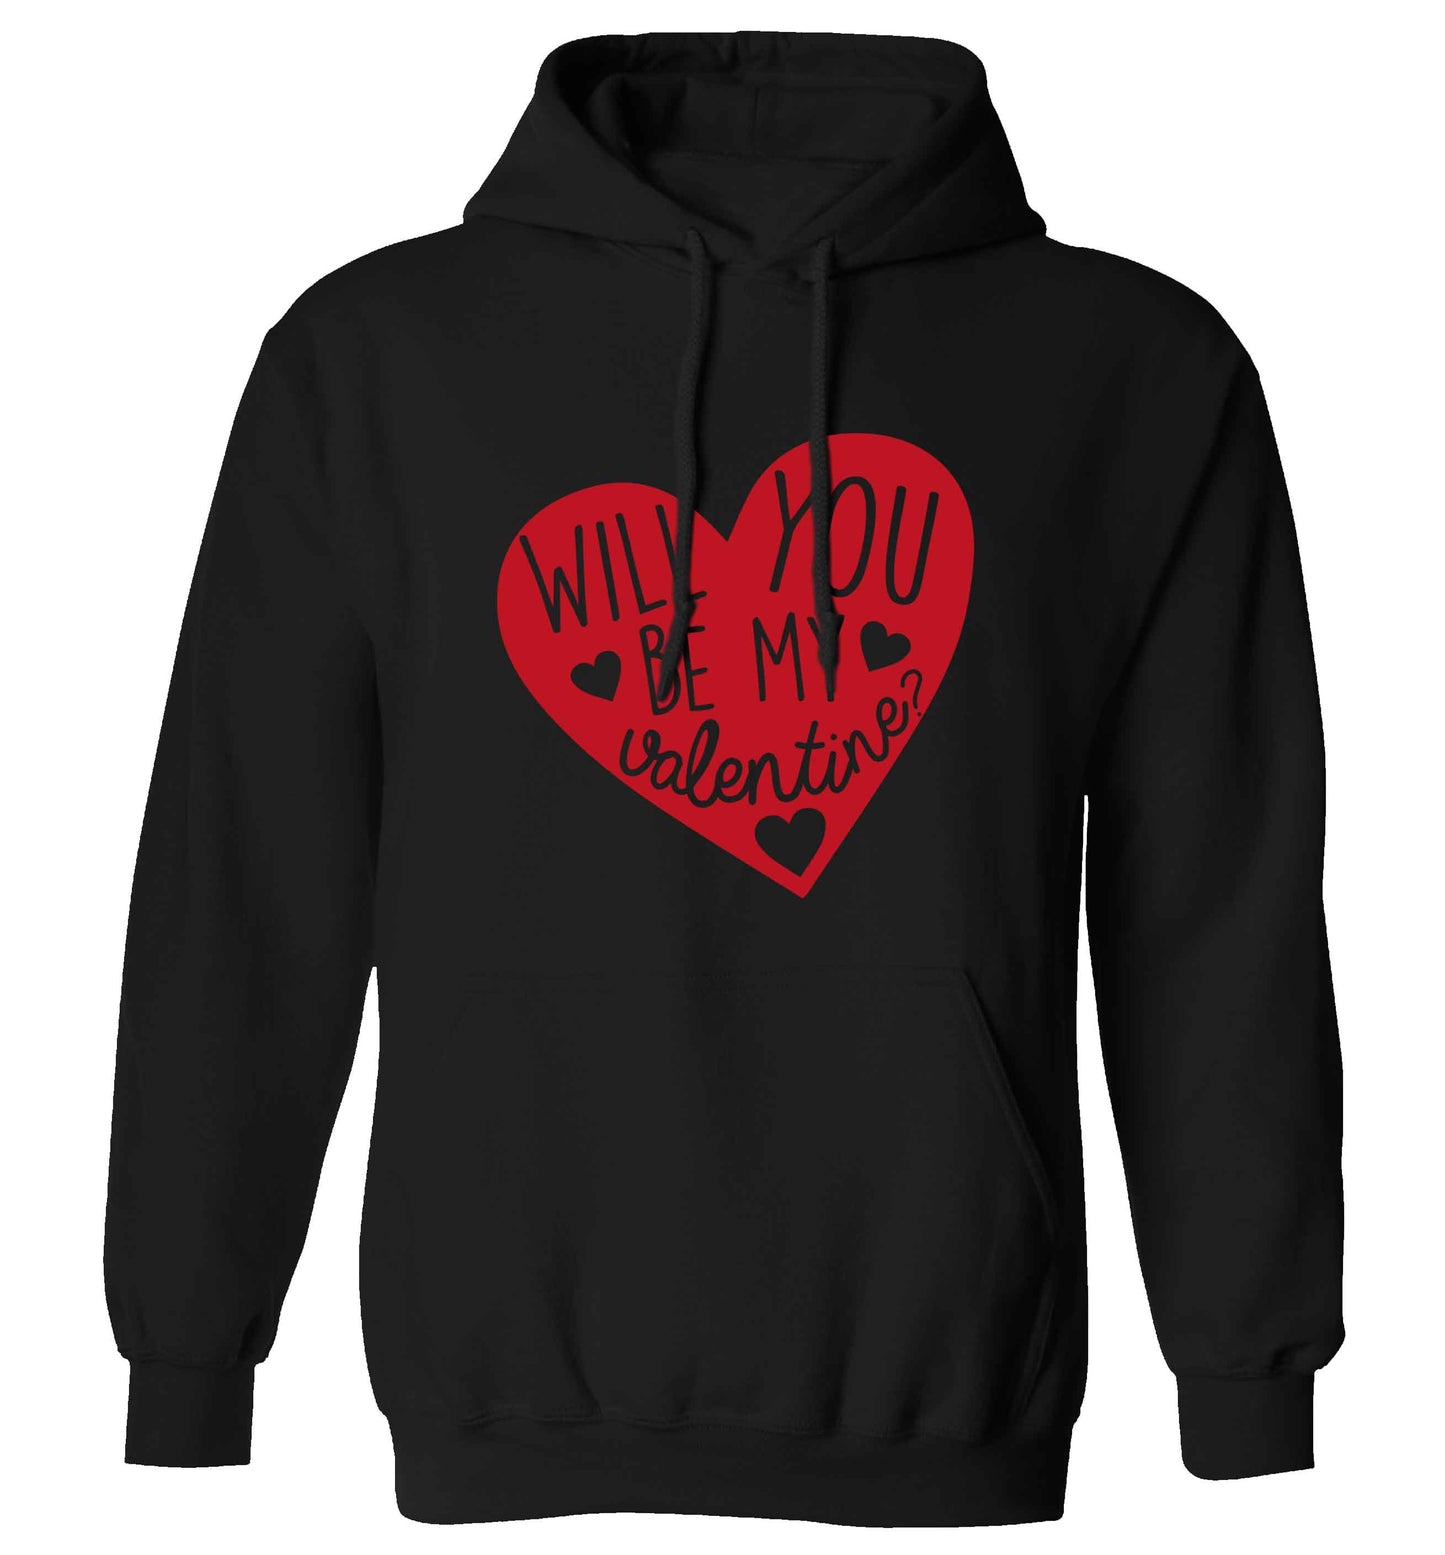 Will you be my valentine? adults unisex black hoodie 2XL